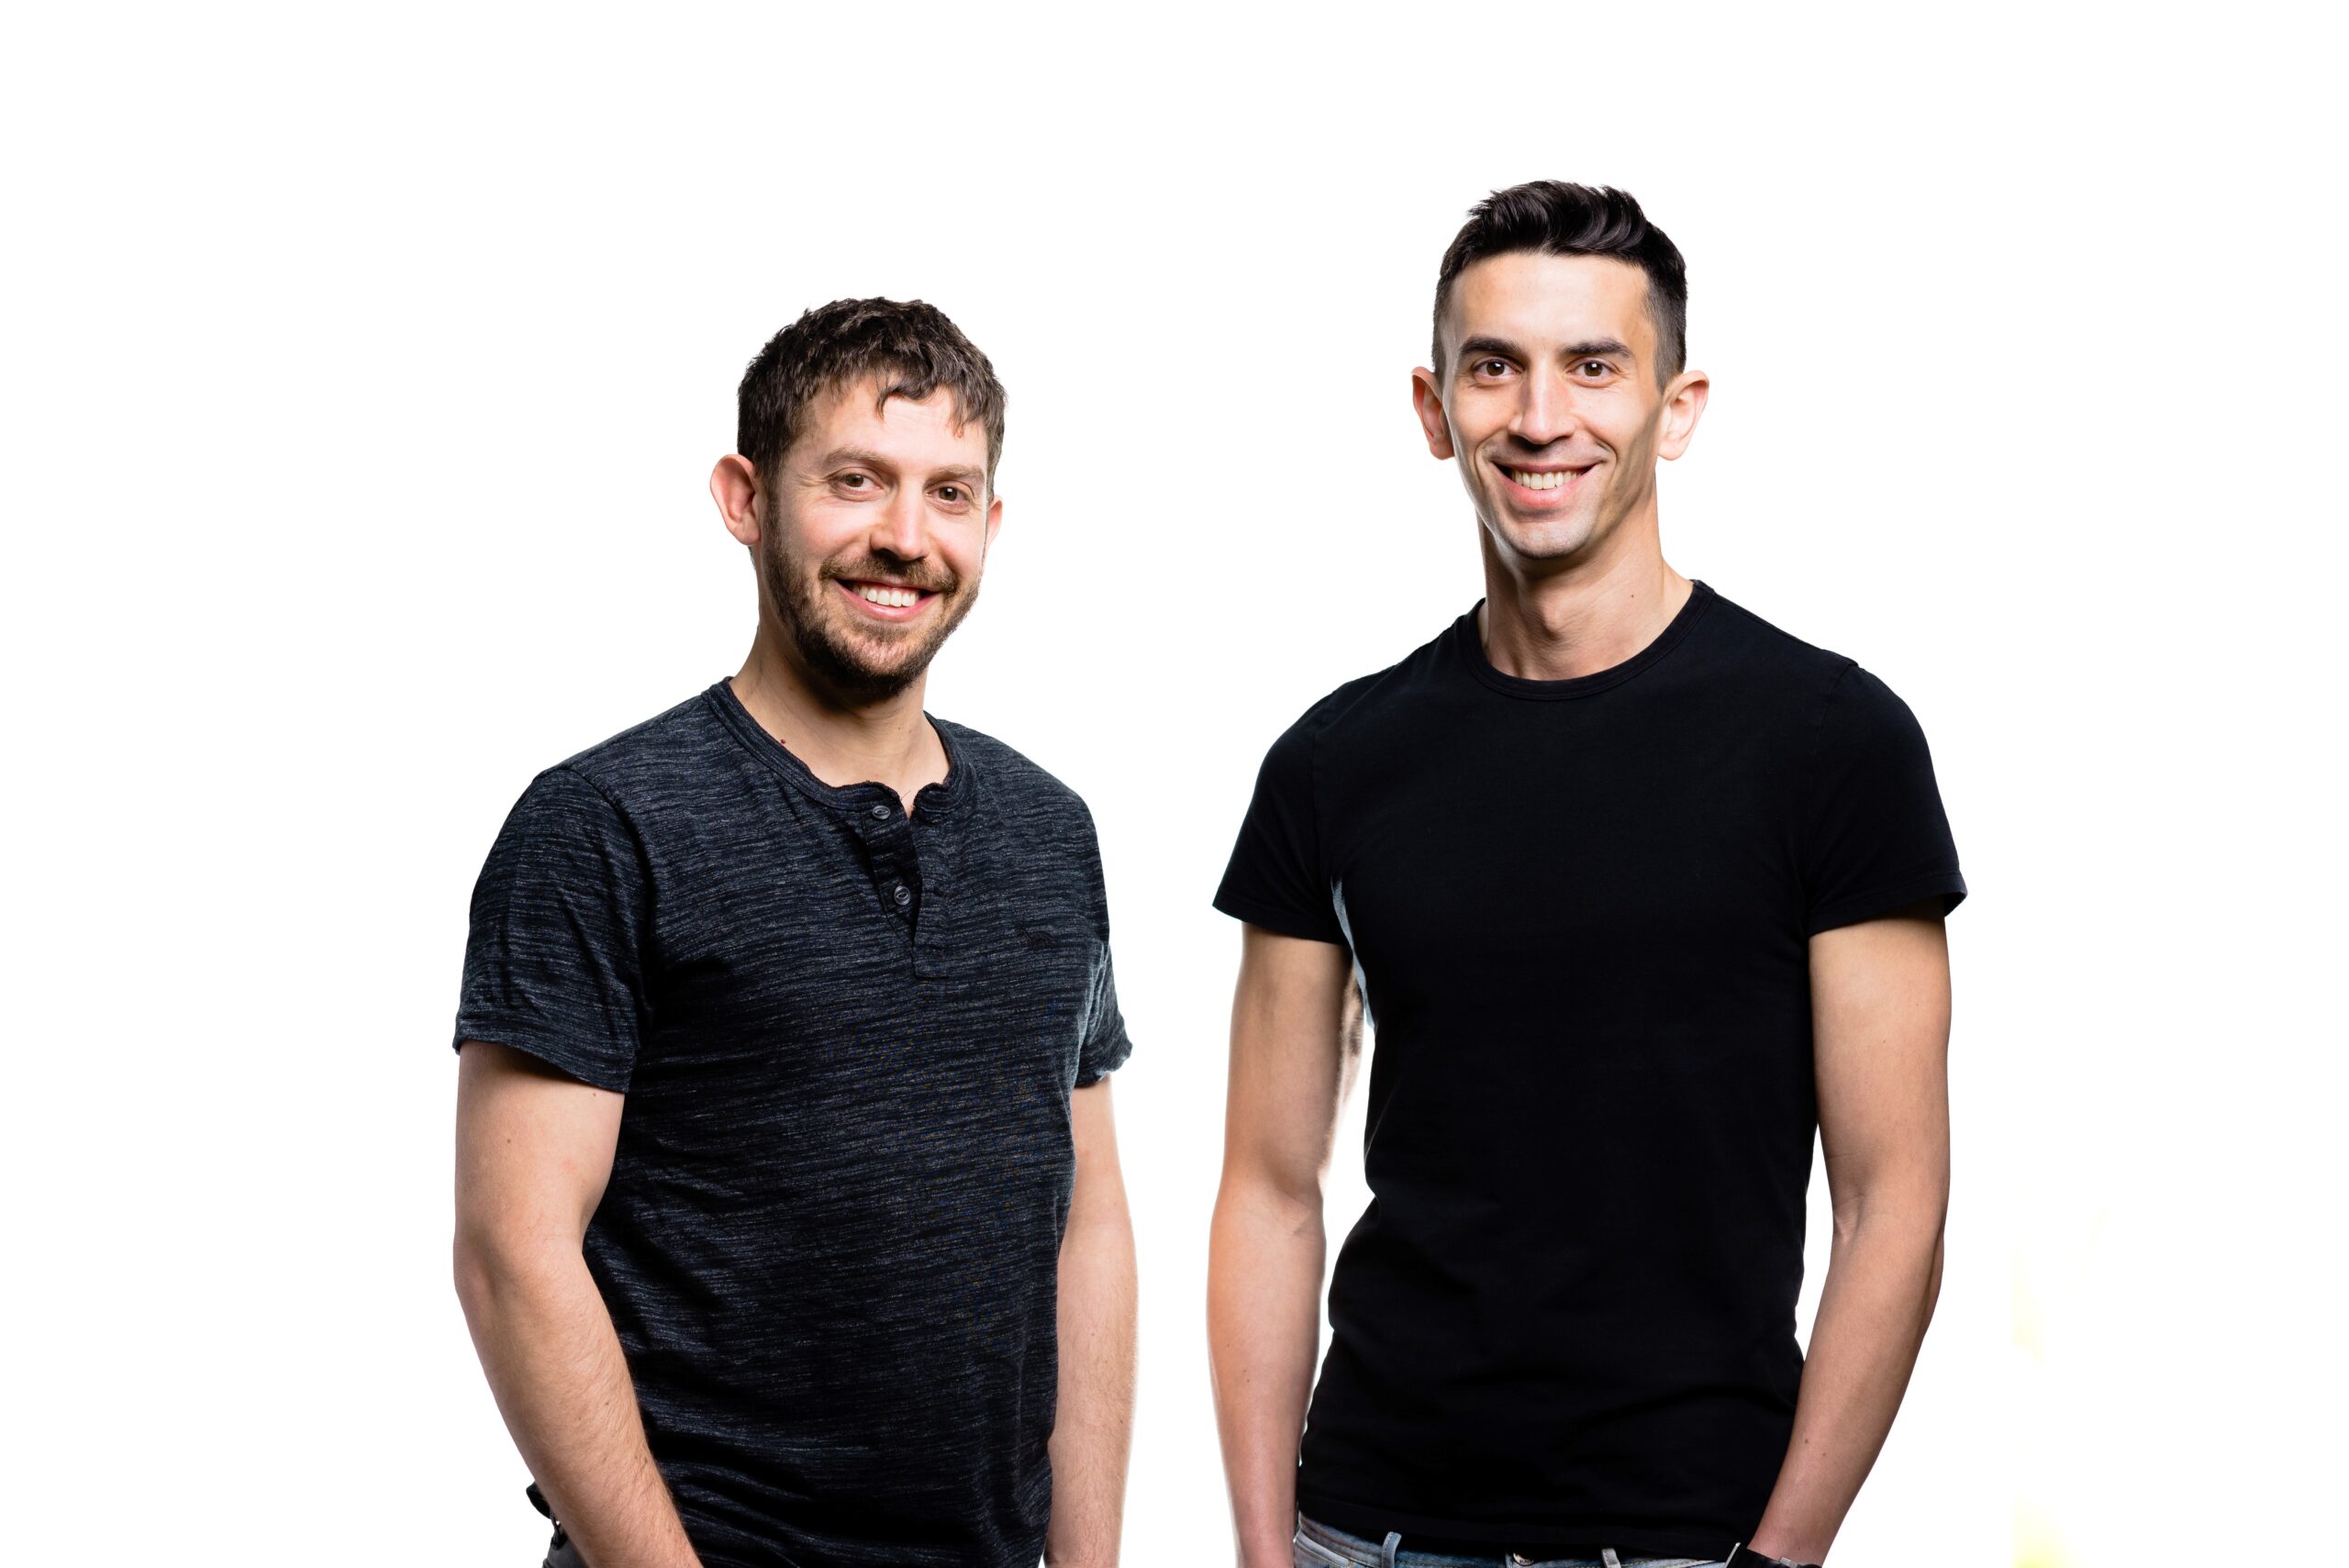 Israeli startup Curv raises USD 23 million to secure digital assets for financial institutions